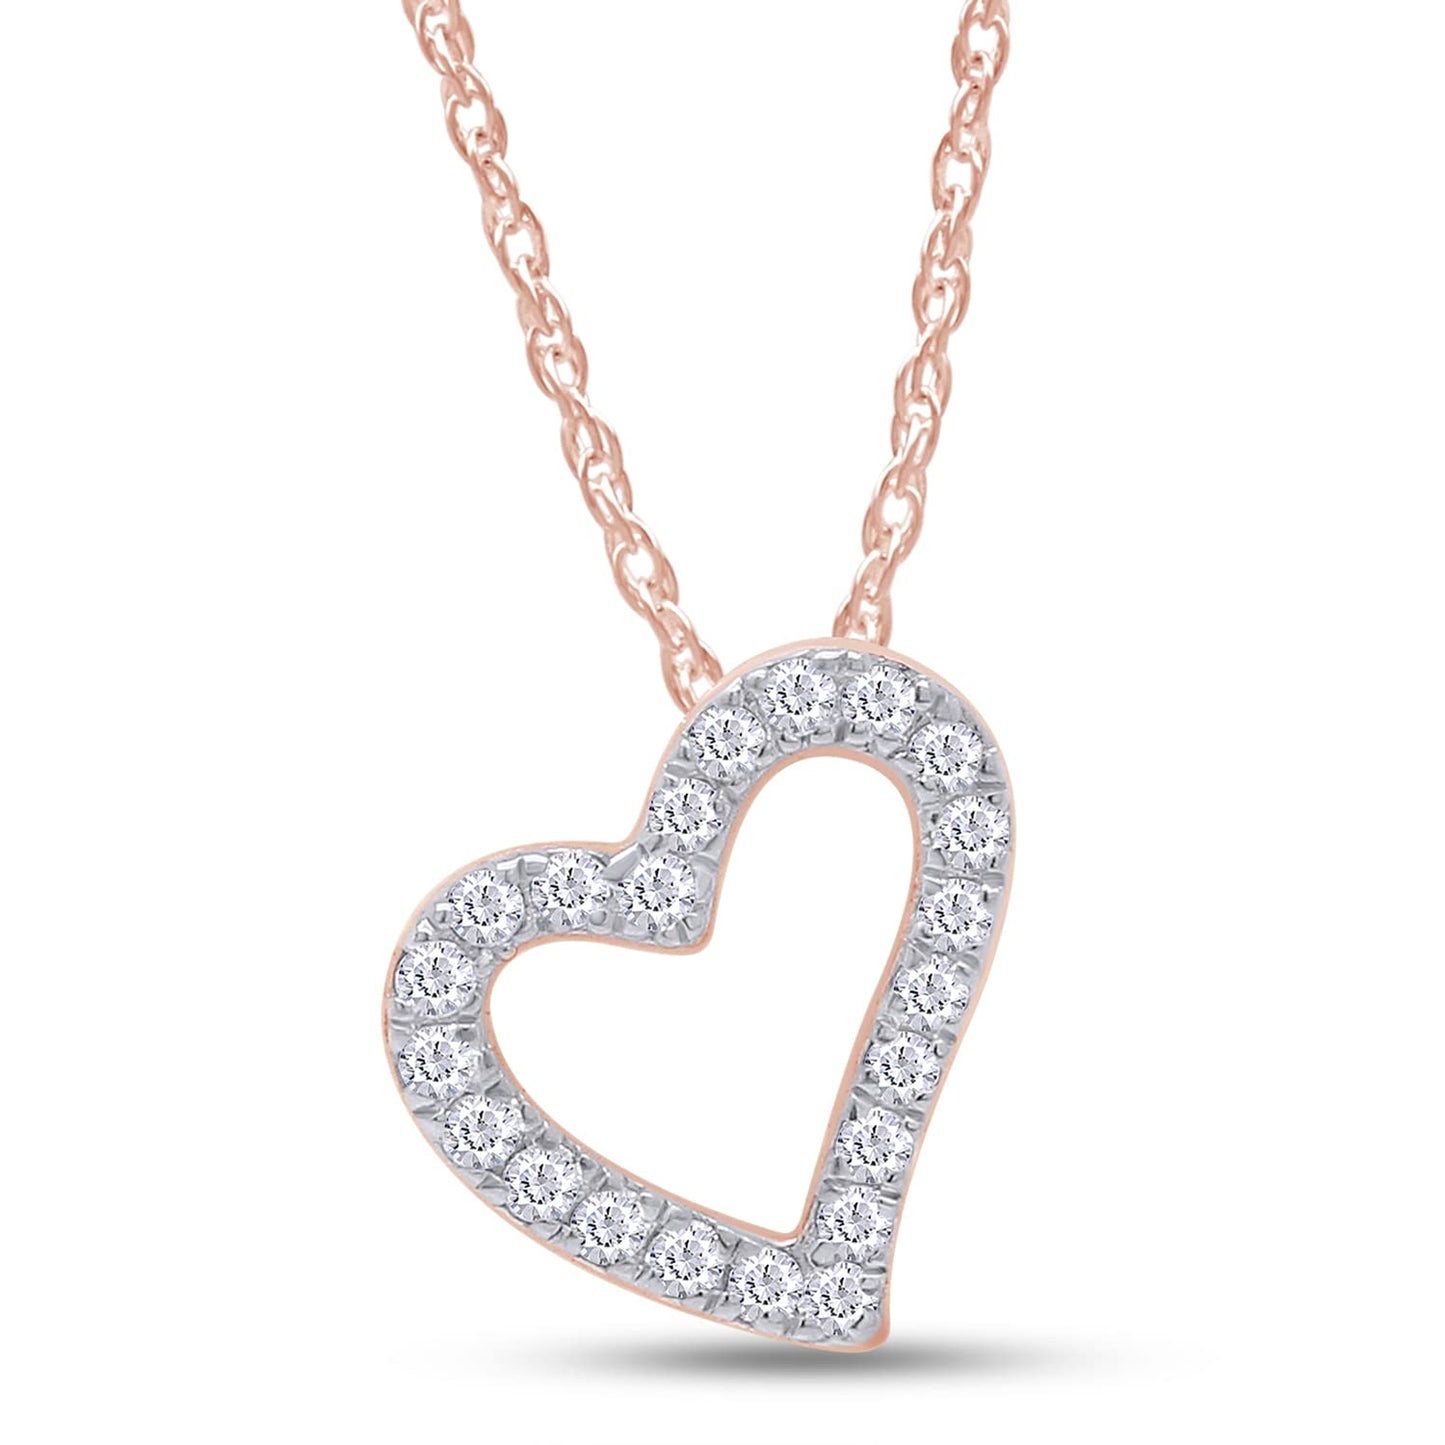 1/8 CT TW Lab Grown Diamond Tilted Heart Necklace Pendant For Women Lab Diamonds In 14K Gold Plated 925 Sterling Silver Accompanied By 18" Rope Chain With Certificate of Authenticity